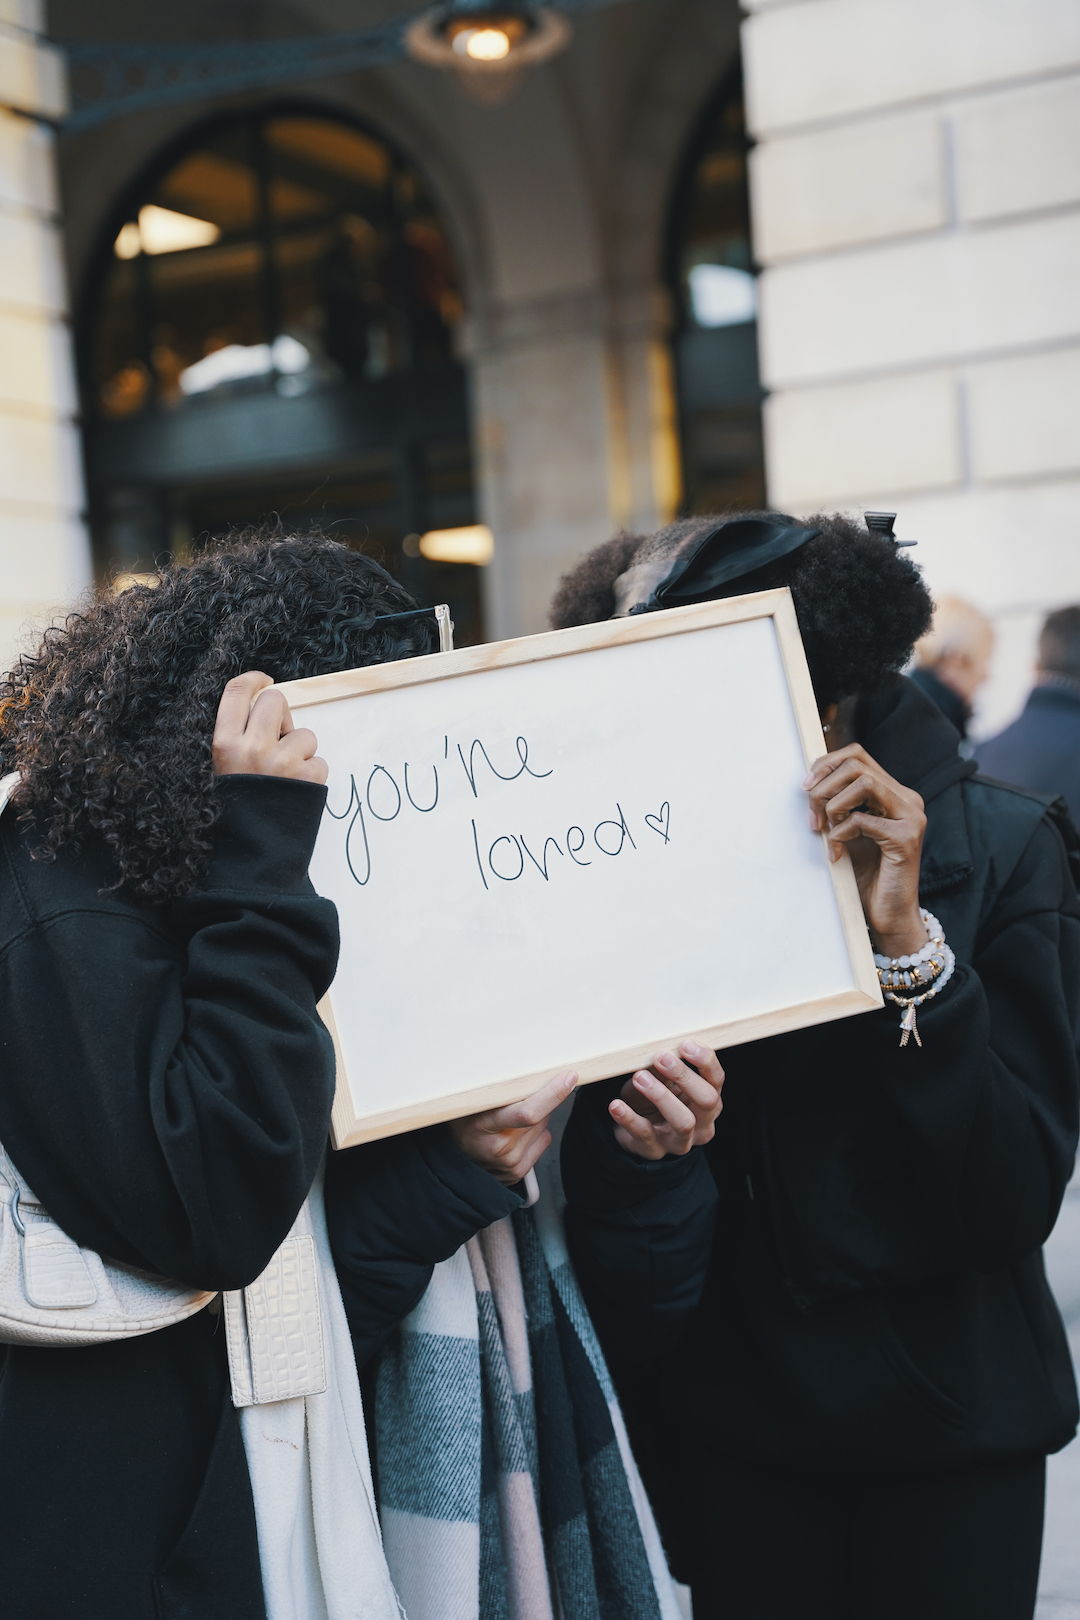 Two young people holding a sign saying 'You're loved'.